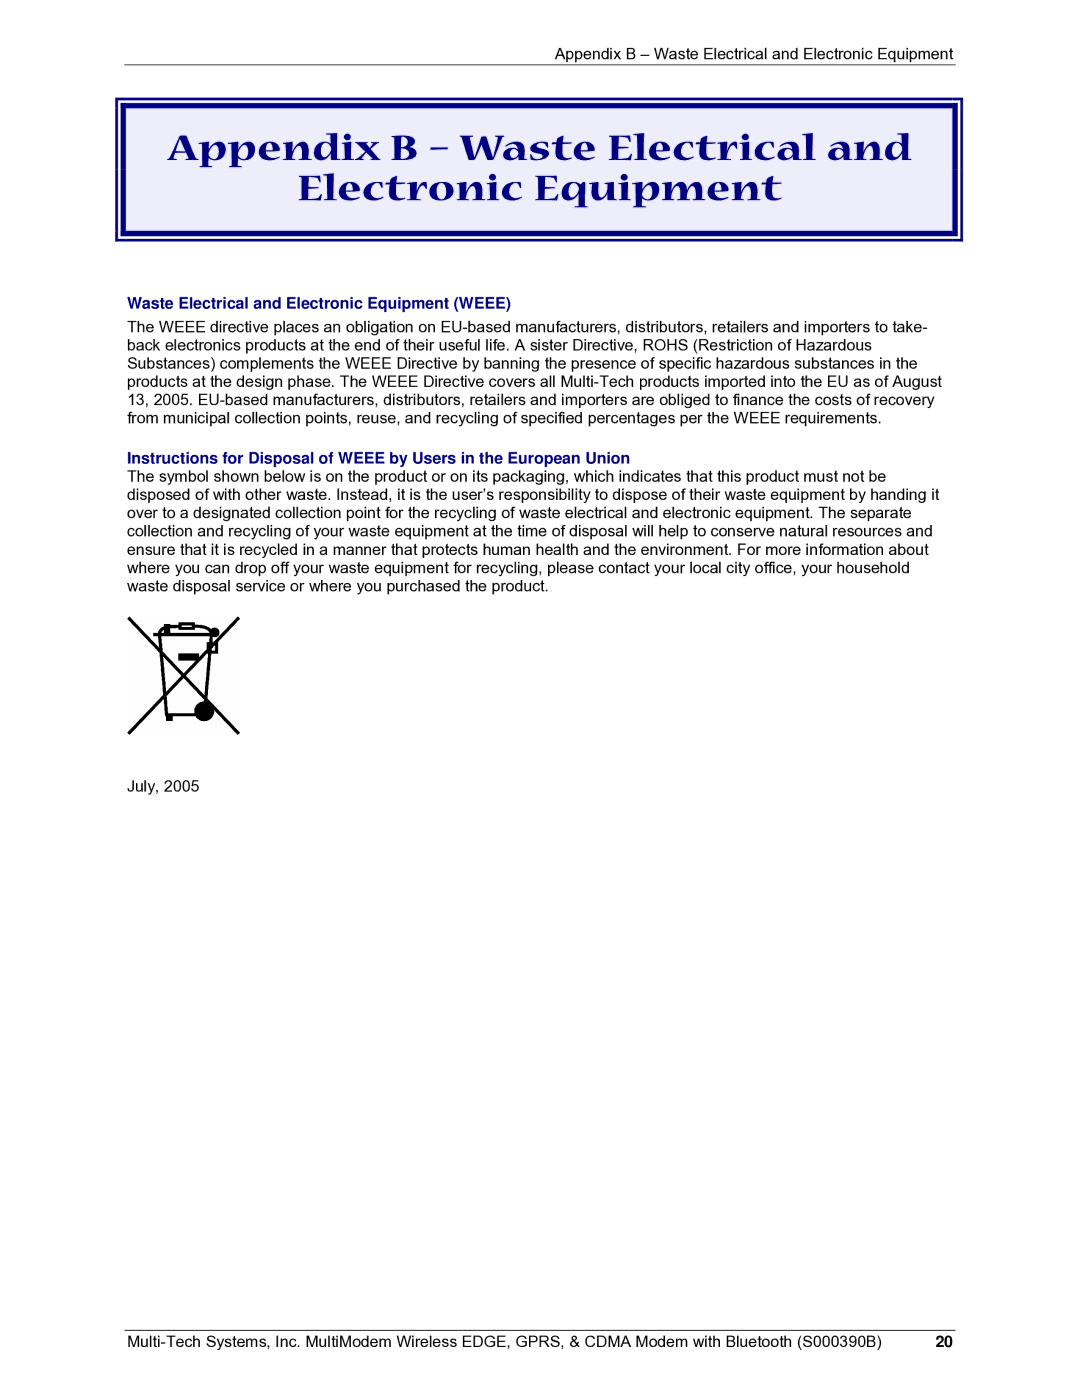 Multi-Tech Systems MultiModem manual Appendix B Waste Electrical Electronic Equipment 